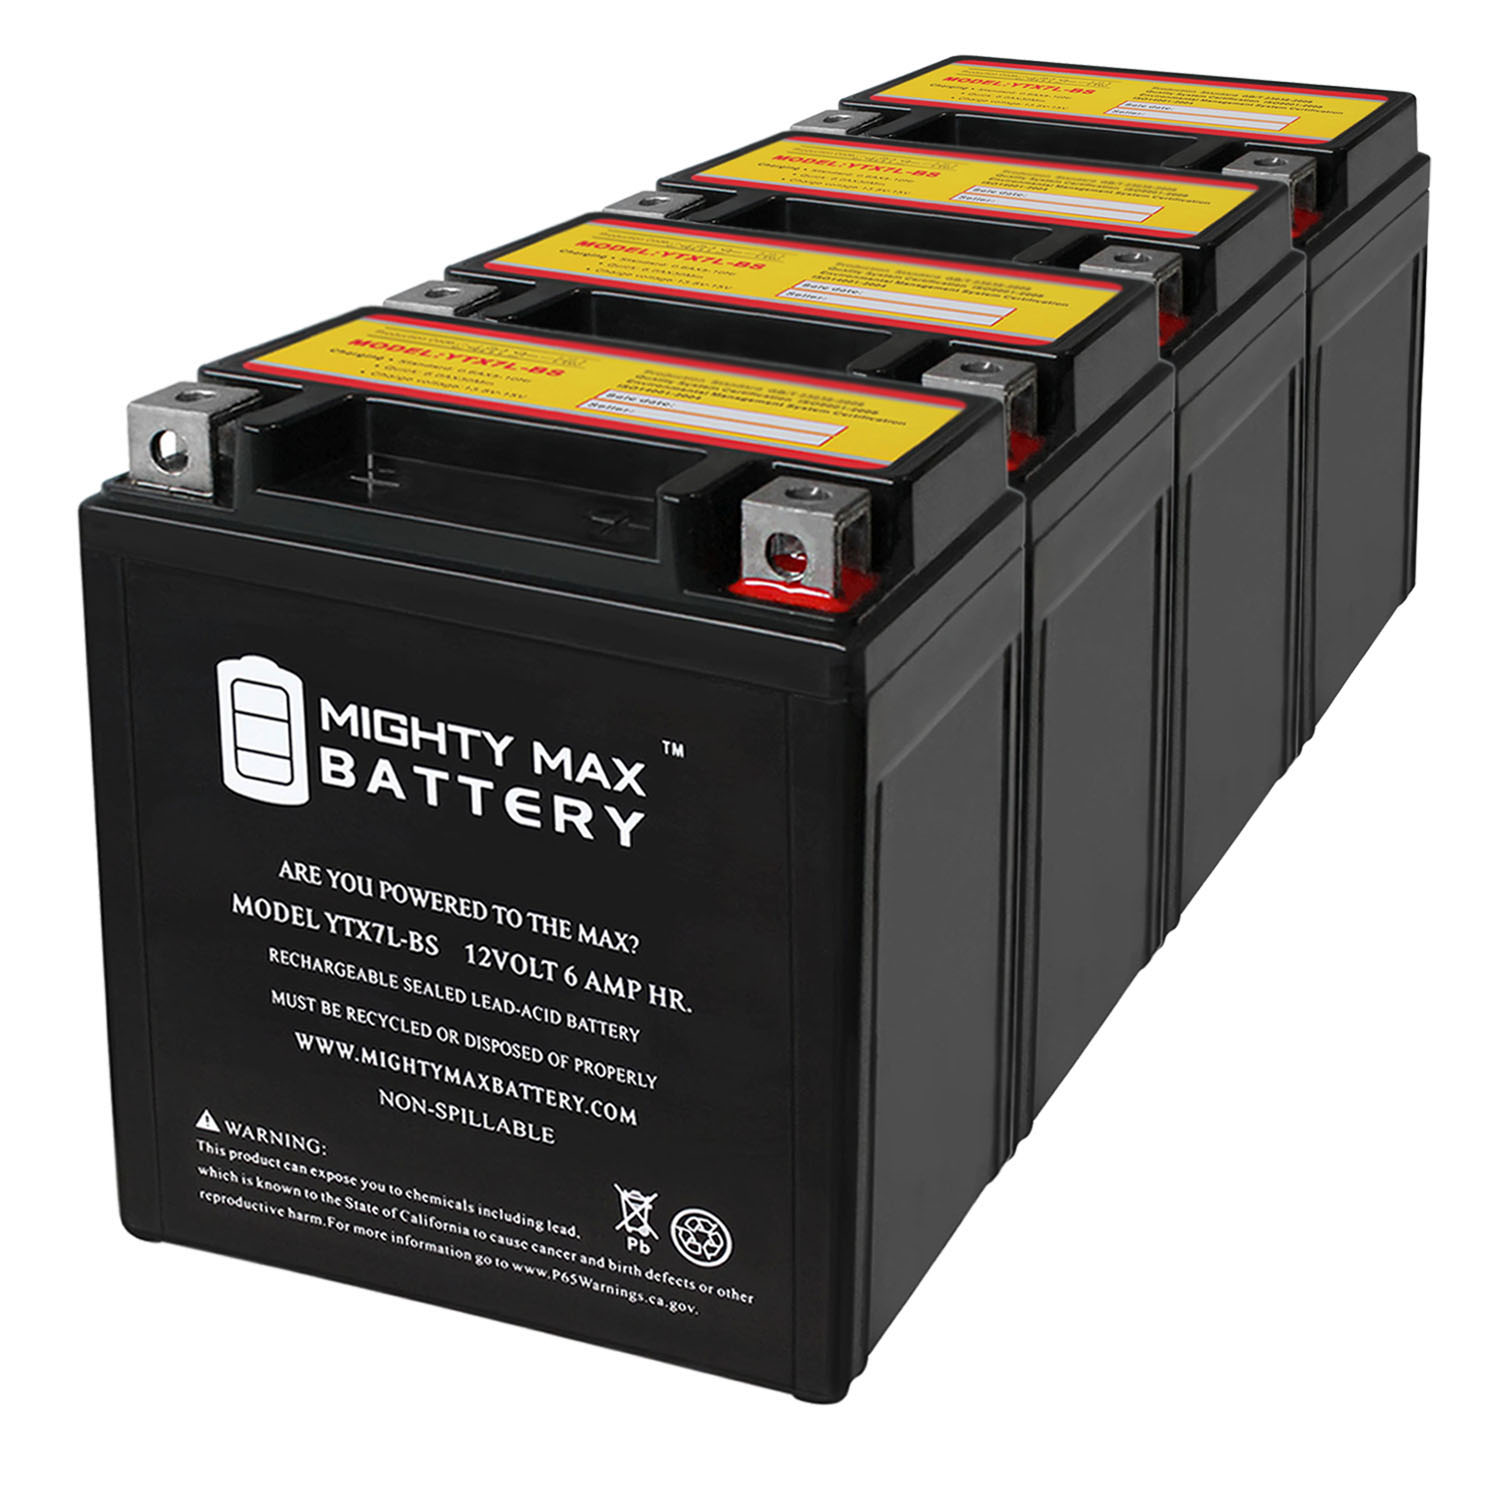 YTX7L-BS 12V 6Ah Replacement Battery Compatible with Chrome YTX7L-BS - 4 Pack